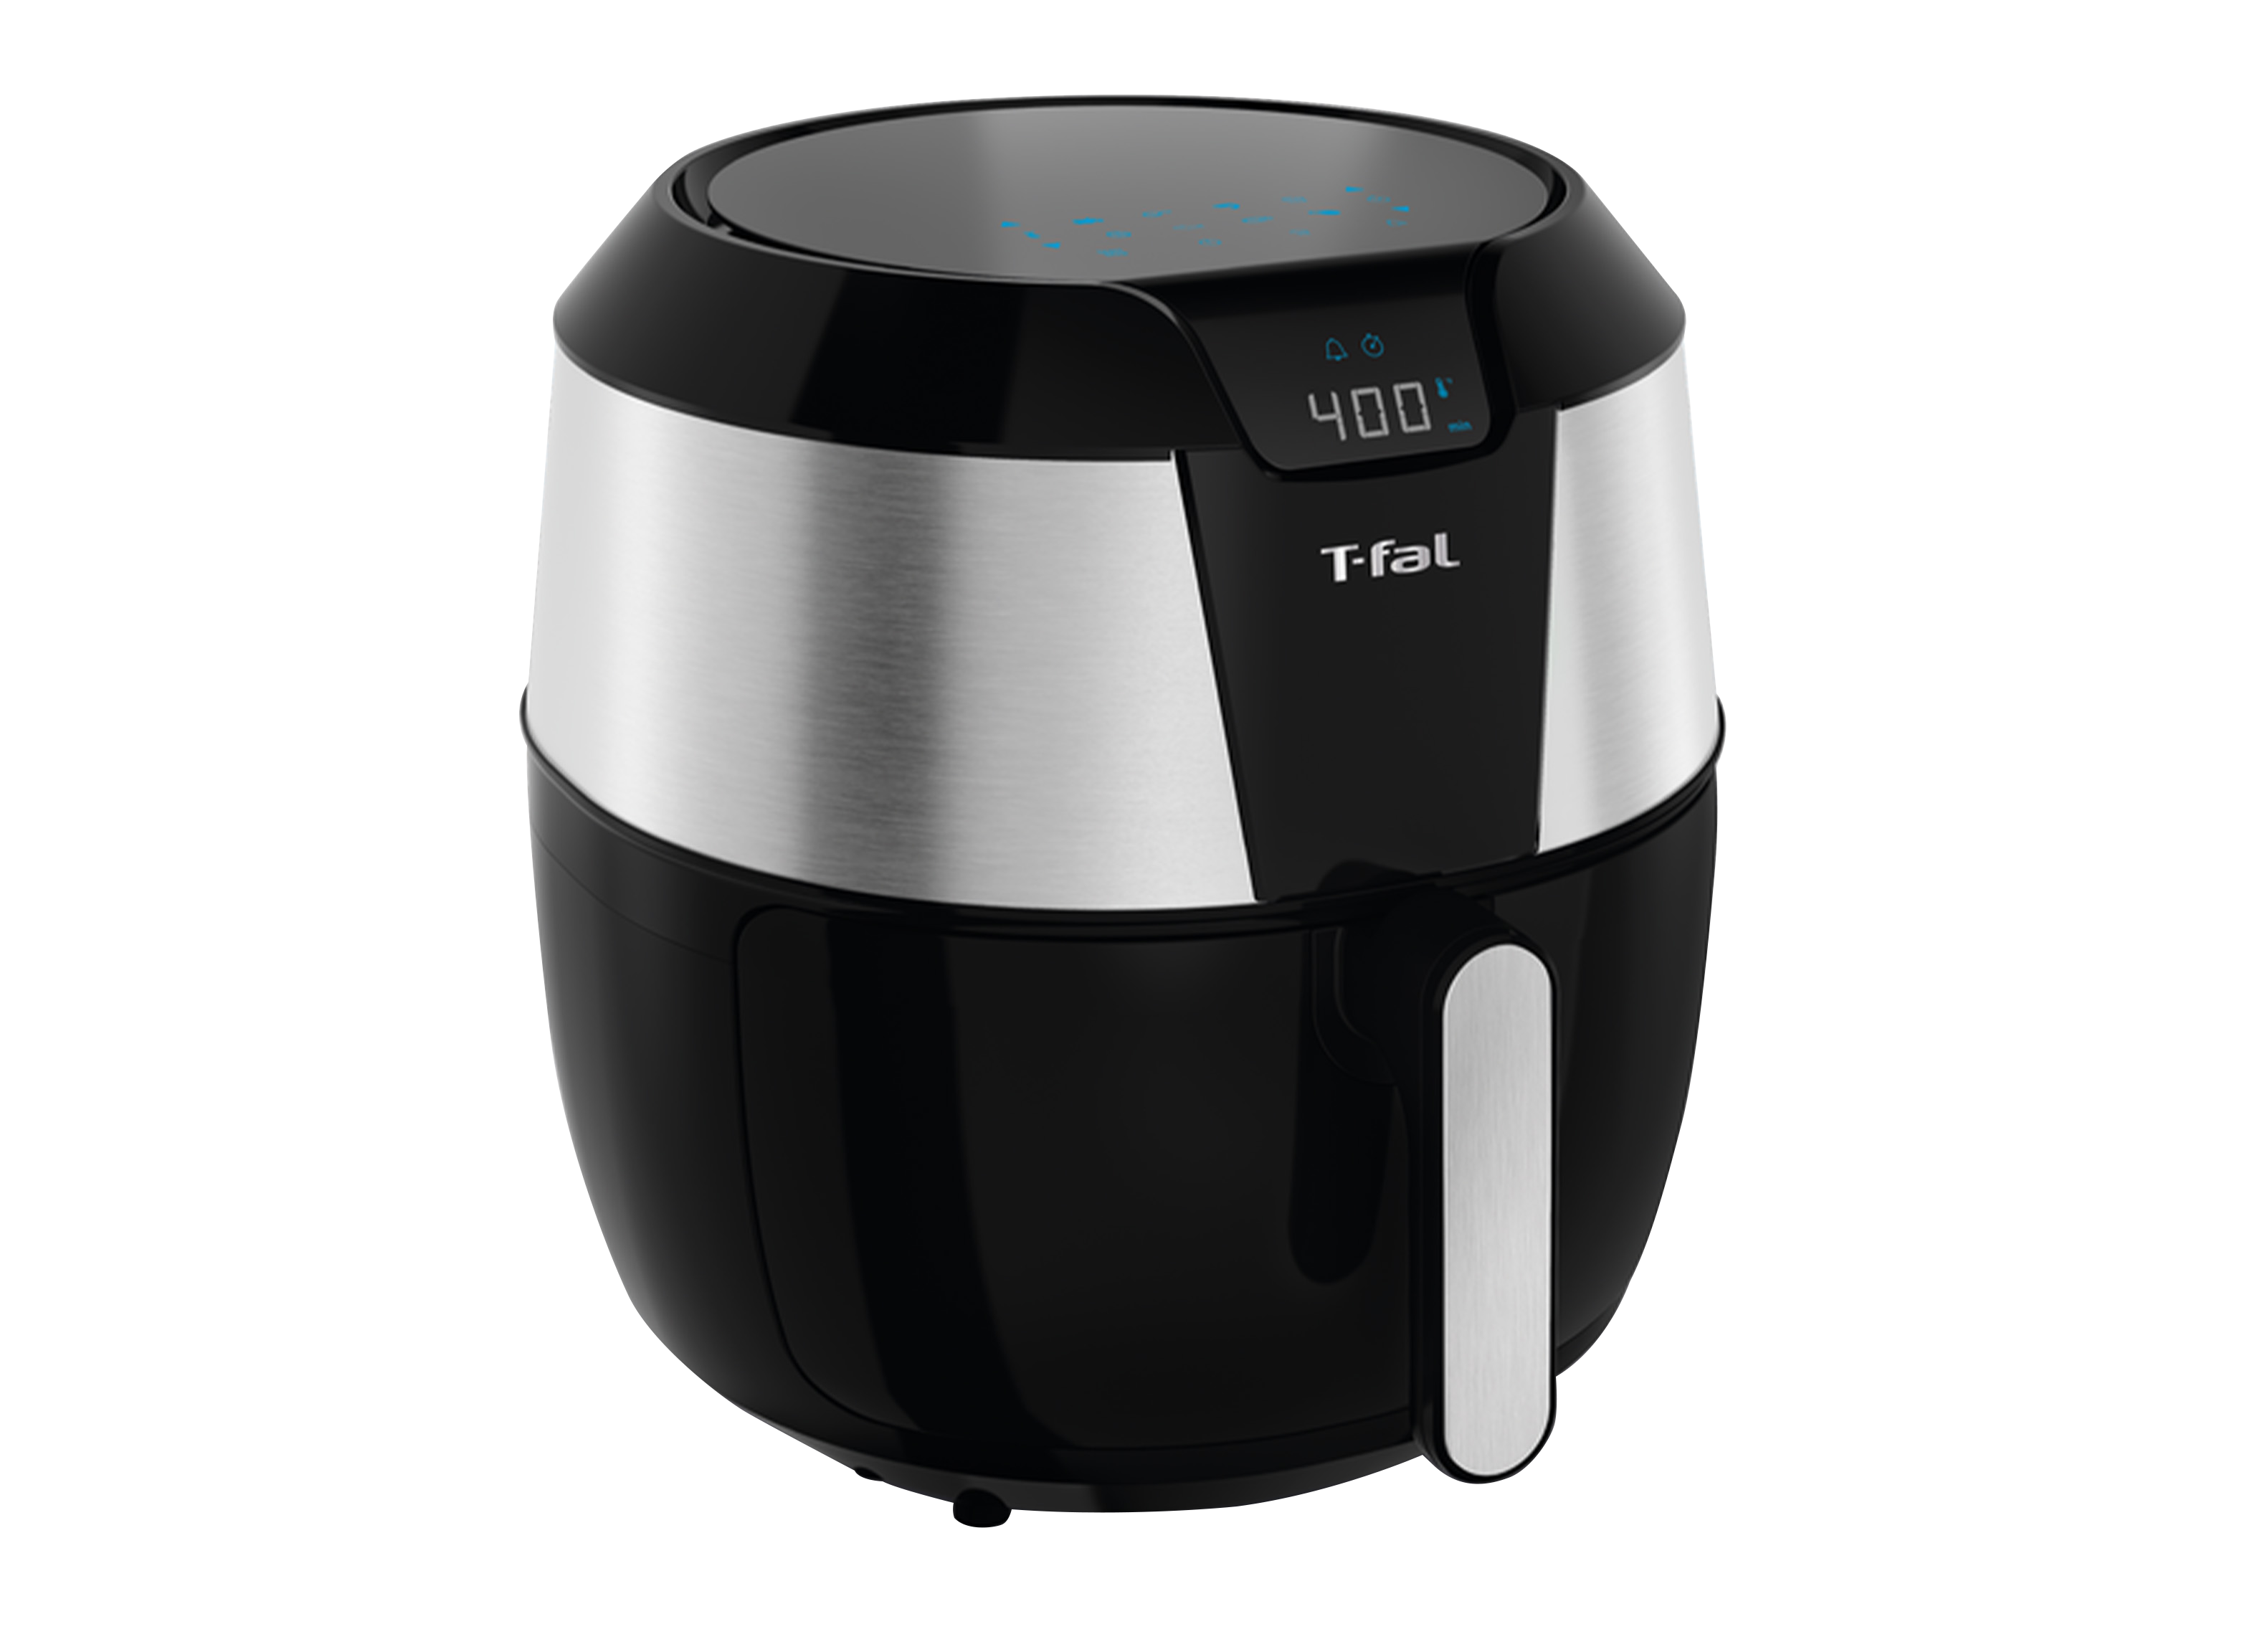 https://crdms.images.consumerreports.org/prod/products/cr/models/407796-air-fryers-t-fal-easy-fry-xxl-air-fryer-and-grill-10032510.png